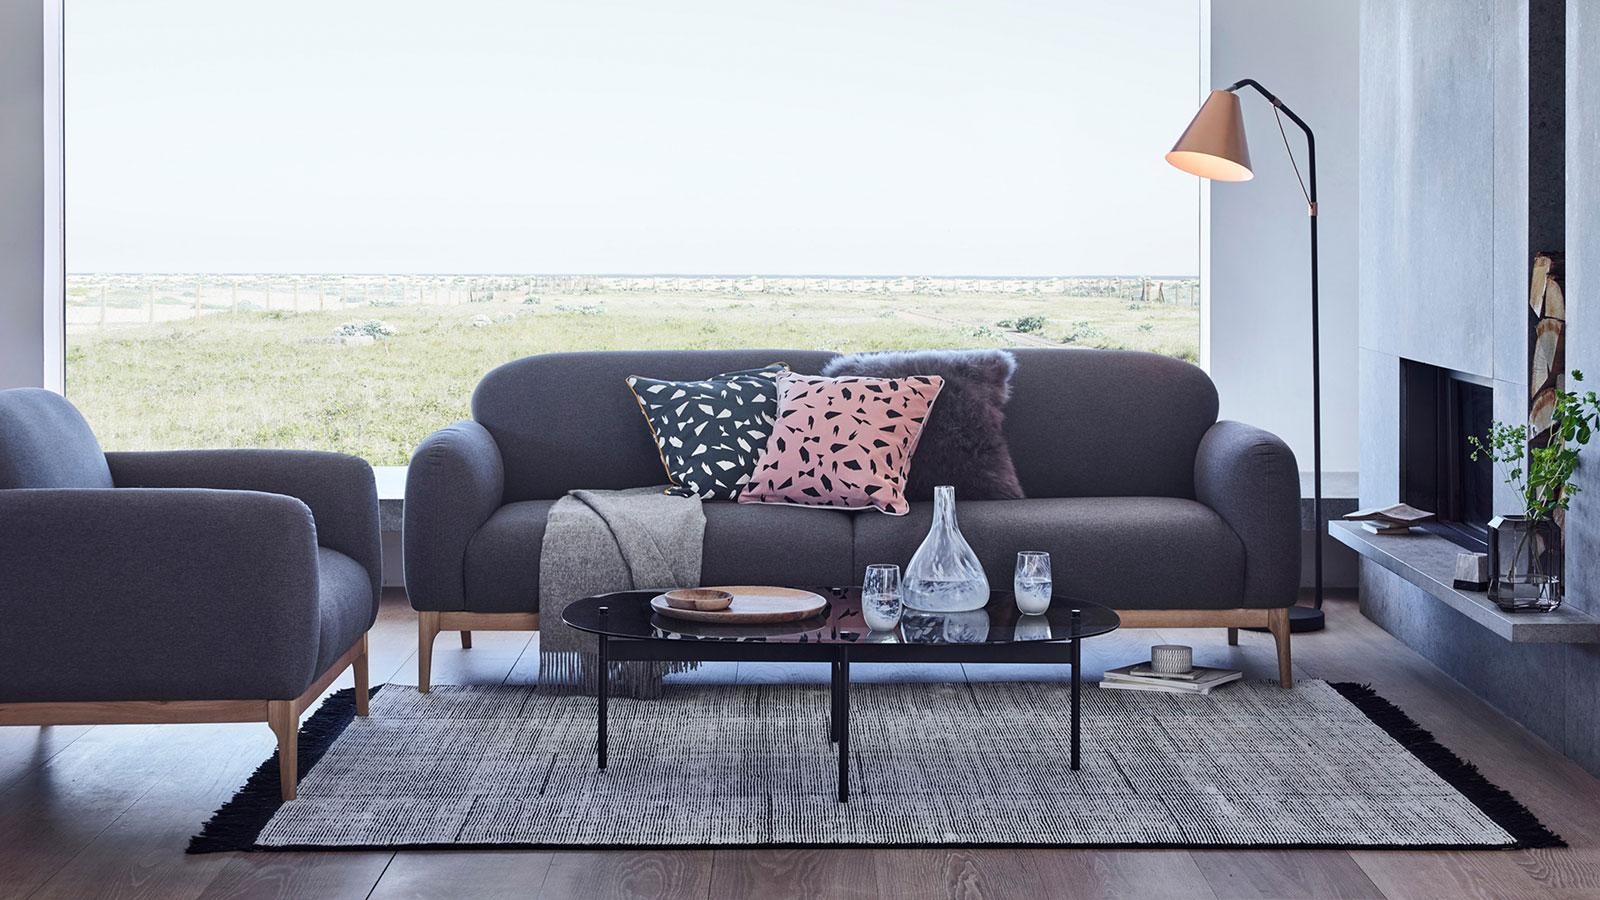 Nordic inspired – The new Morten furniture collection from Heal’s - DASTORE